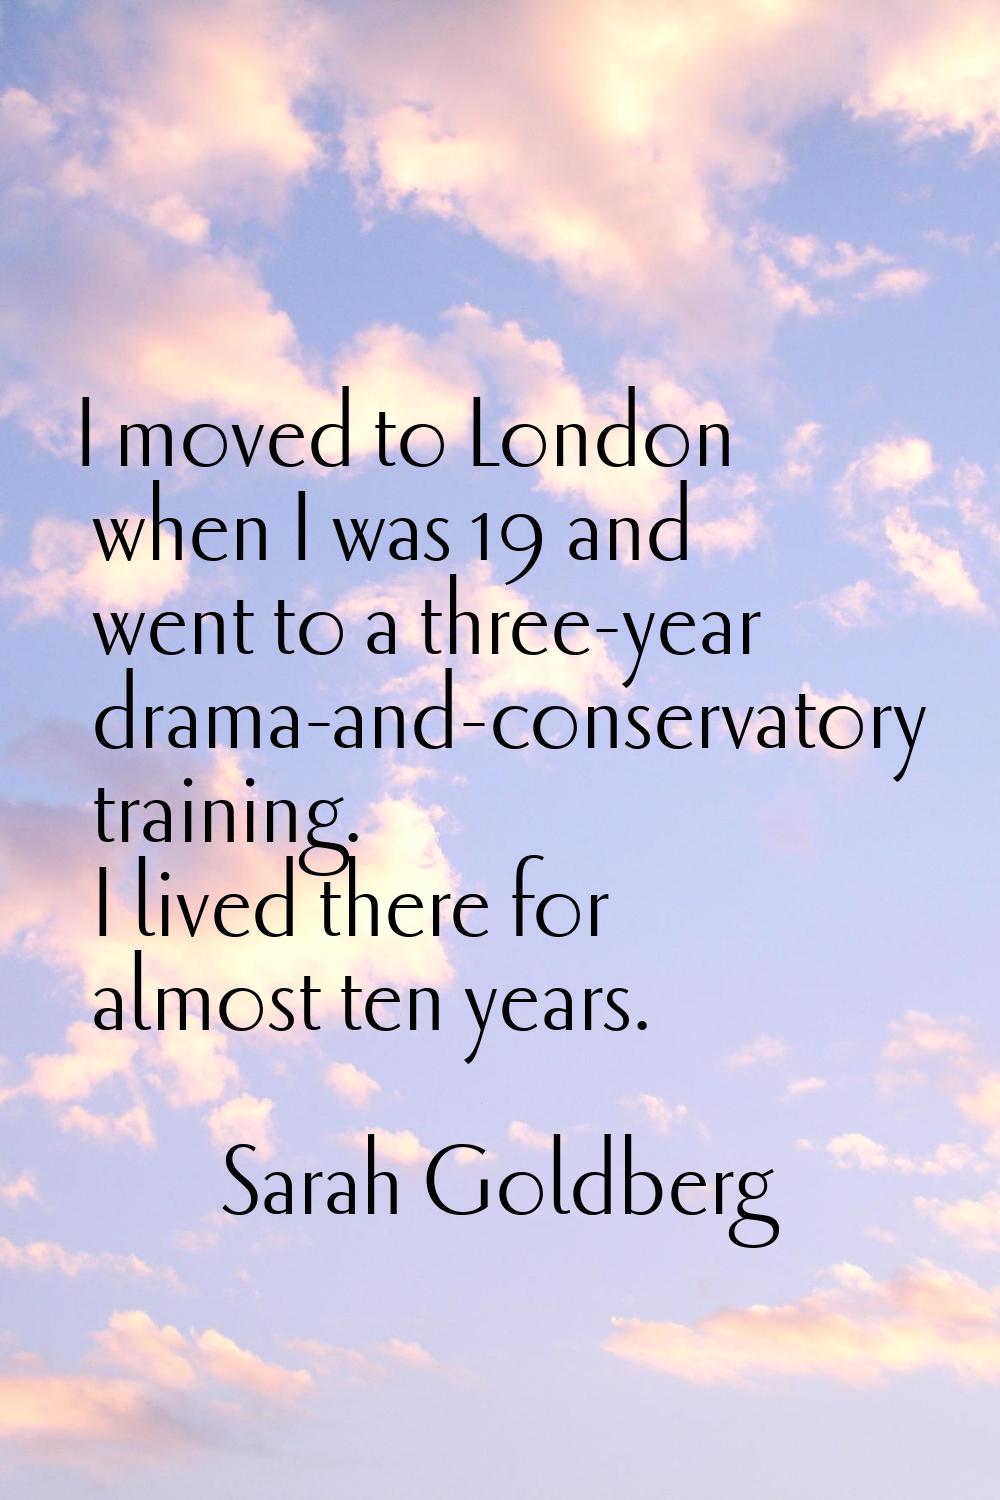 I moved to London when I was 19 and went to a three-year drama-and-conservatory training. I lived t